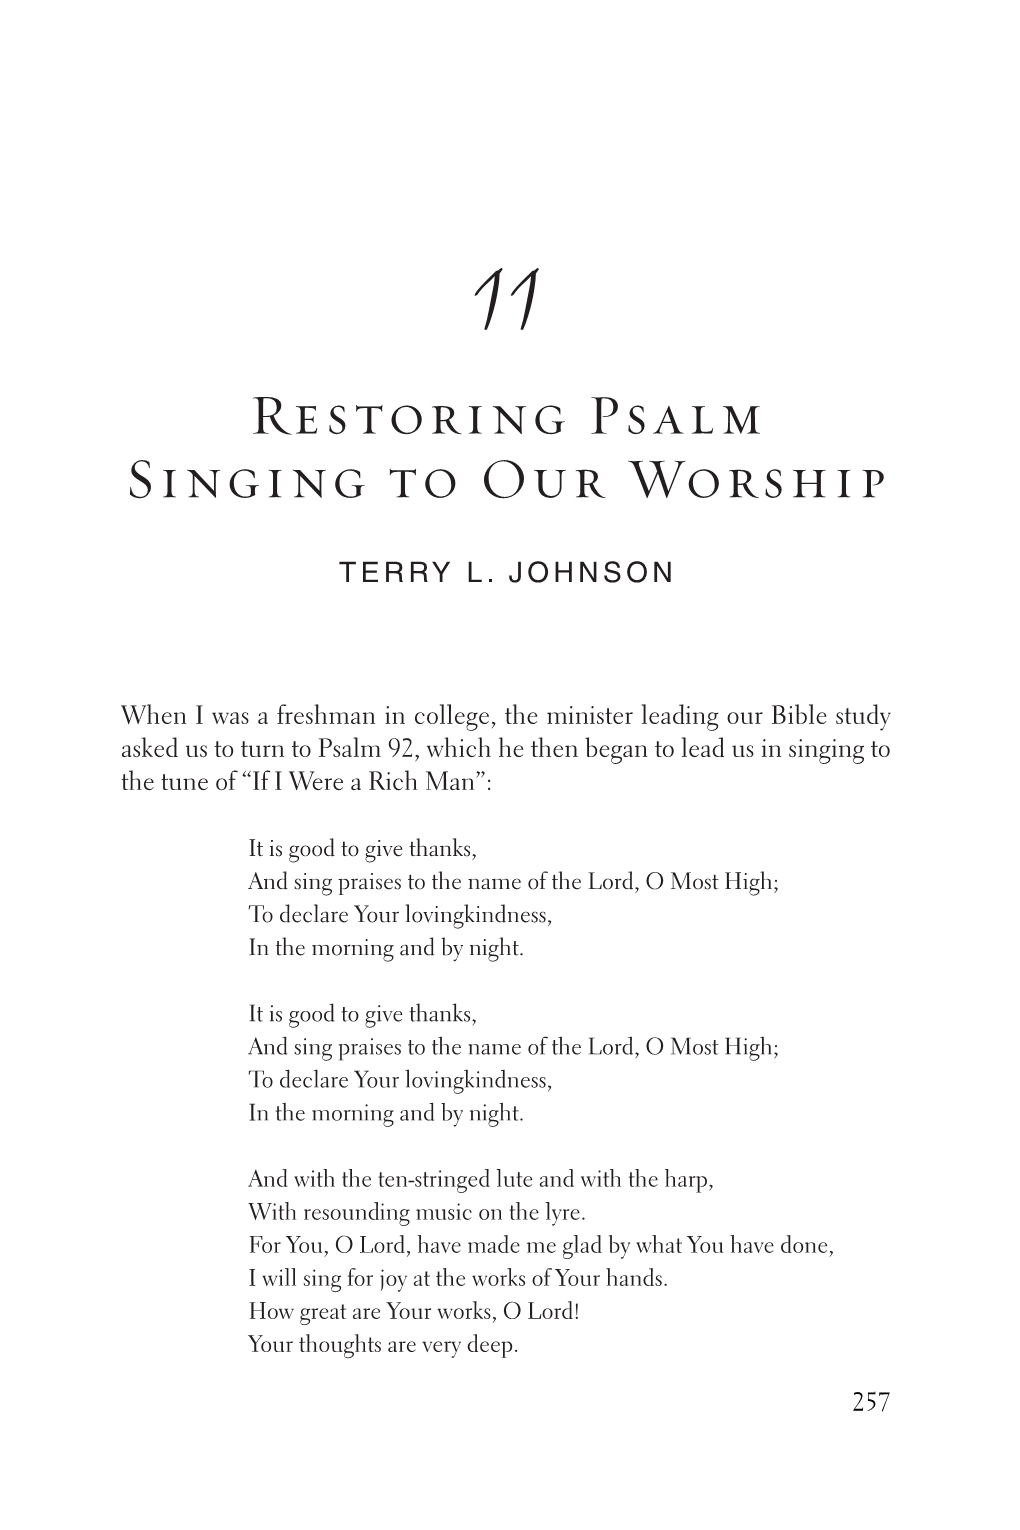 Article on Singing Psalms